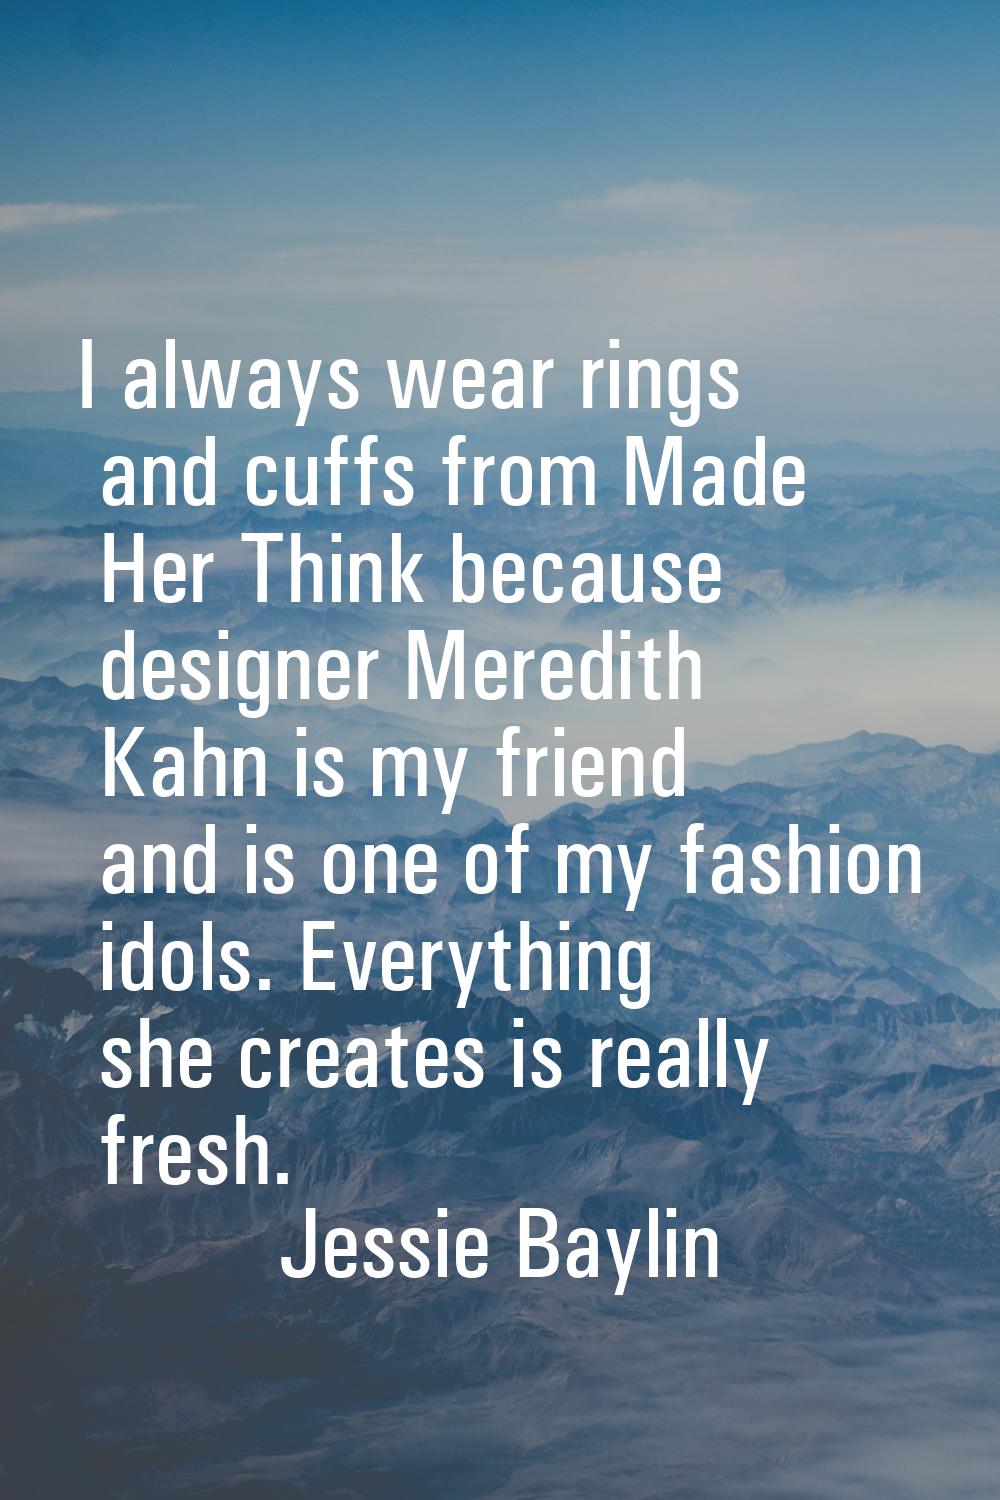 I always wear rings and cuffs from Made Her Think because designer Meredith Kahn is my friend and i